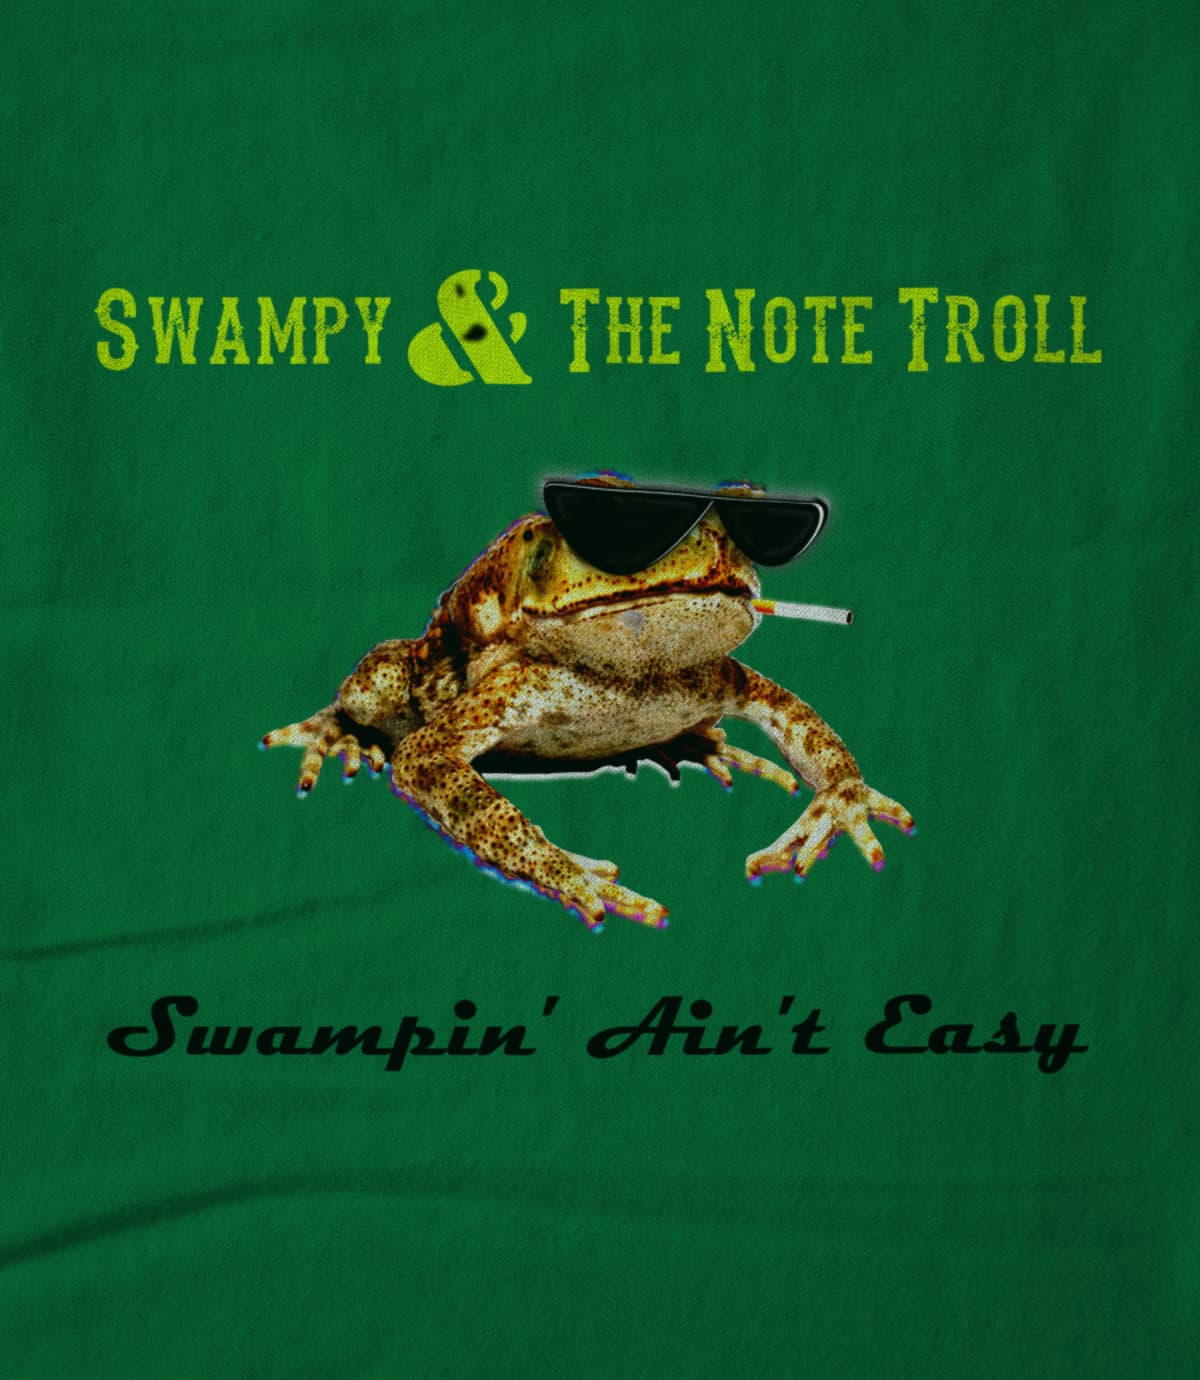 Swampy and The Note Troll